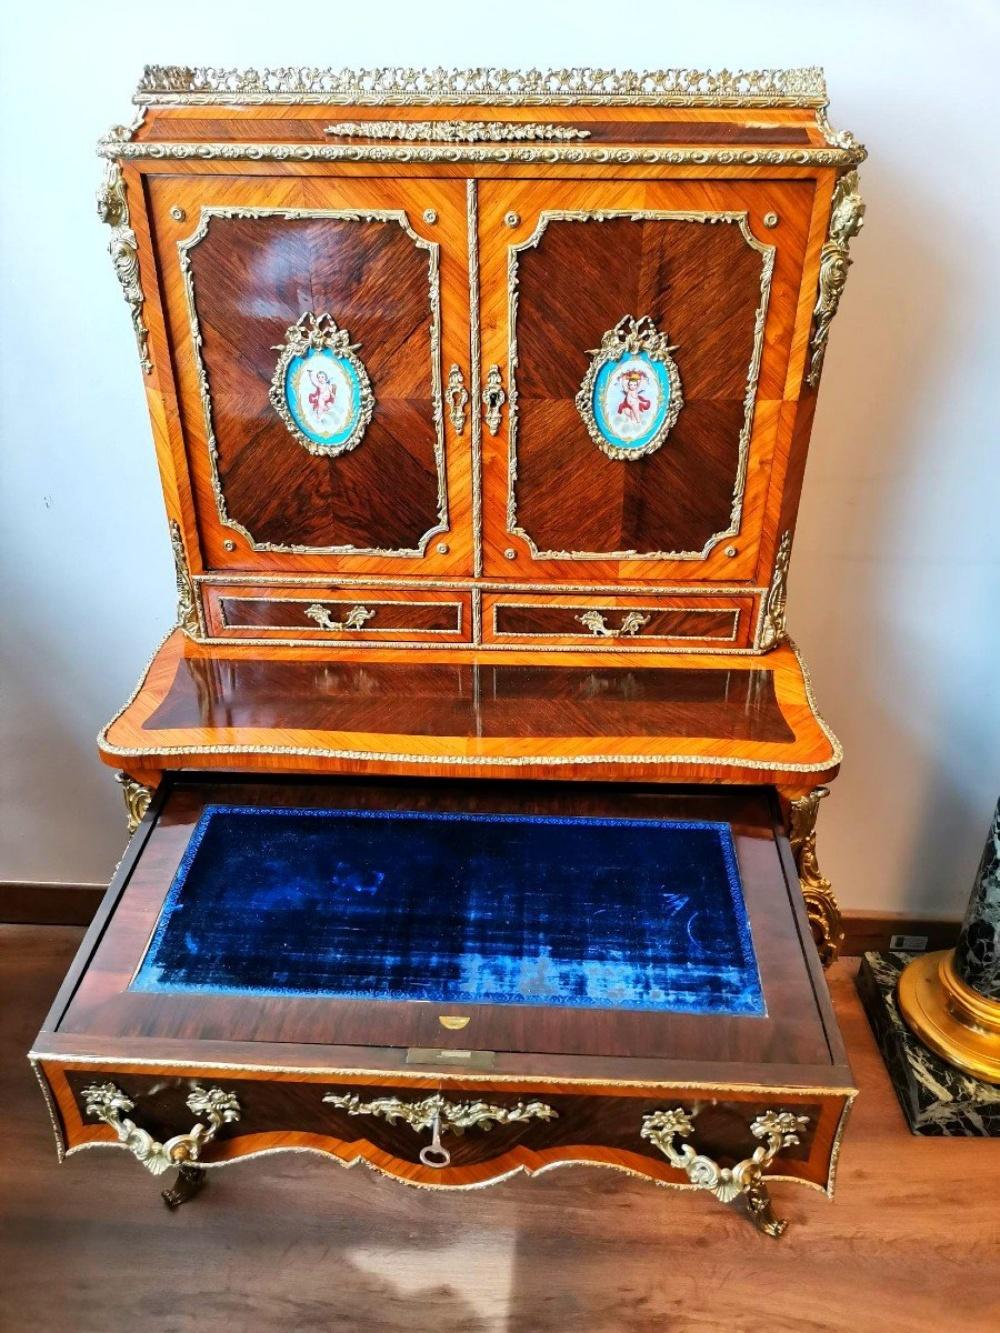 Bonheur Du Jour Desk Napoleon III Period 19th Century Wood Hand Crafted For Sale 1